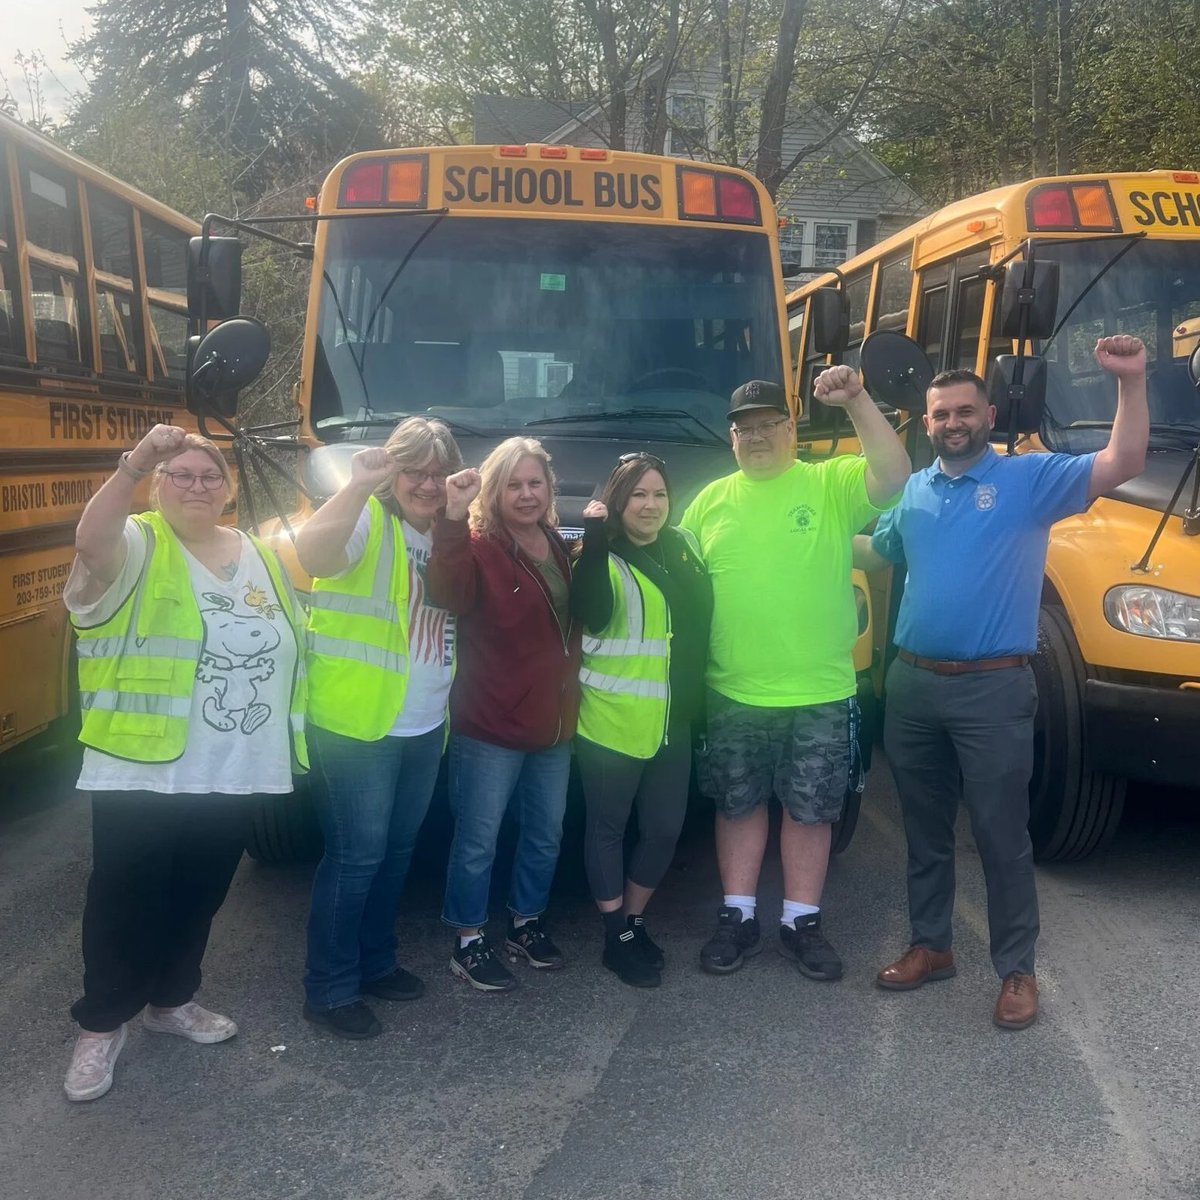 FIRST STUDENT WORKERS IN BRISTOL ORGANIZE WITH TEAMSTERS Big welcome to bus drivers and monitors at First Student in Bristol, Connecticut who have voted overwhelmingly to join #Teamsters Local 671! The new Teamsters provide student transportation for Bristol Public Schools. “In…